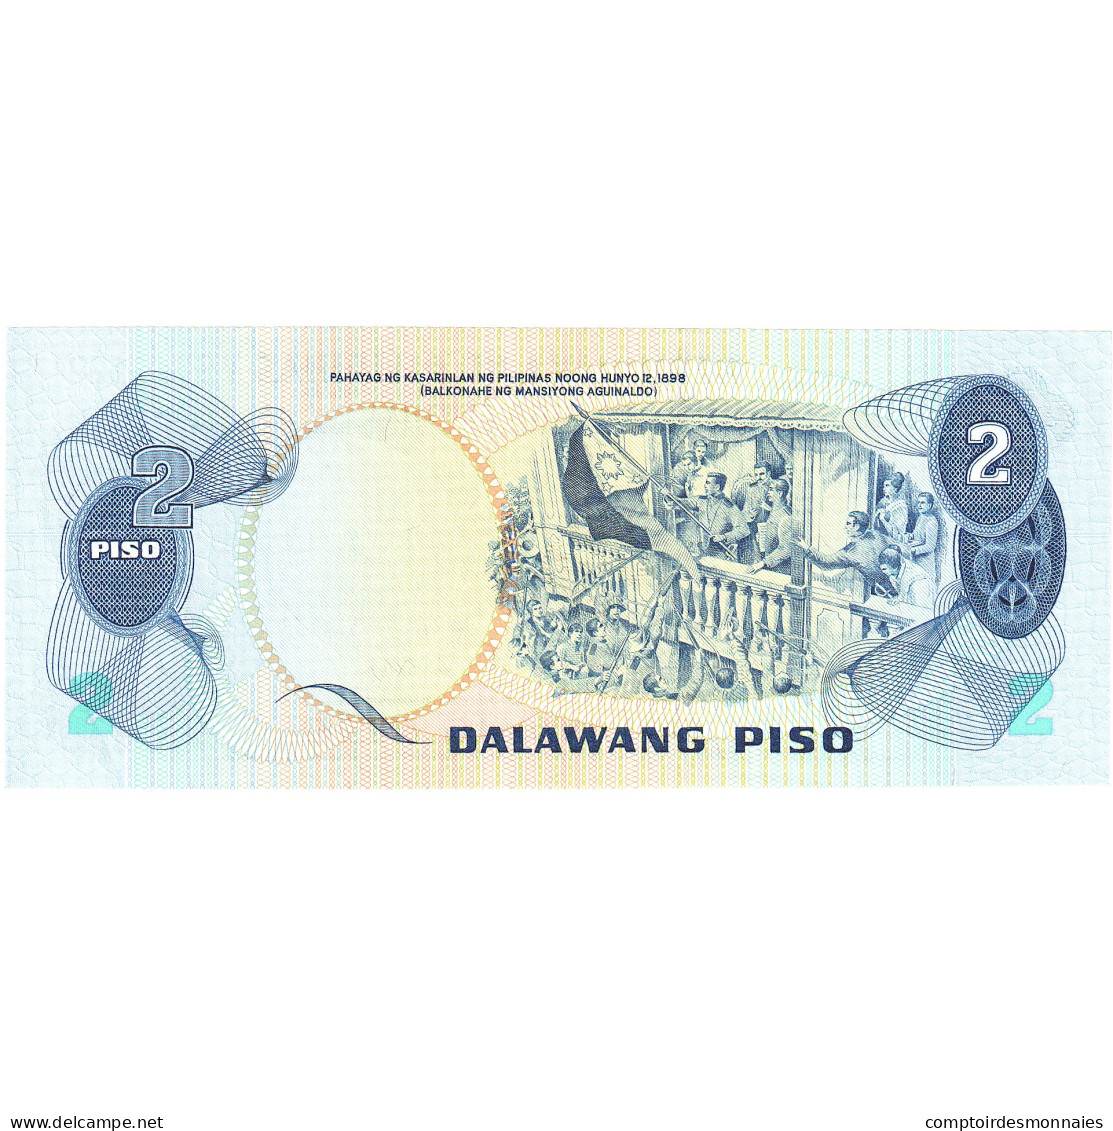 Philippines, 2 Piso, KM:166a, NEUF - Philippines